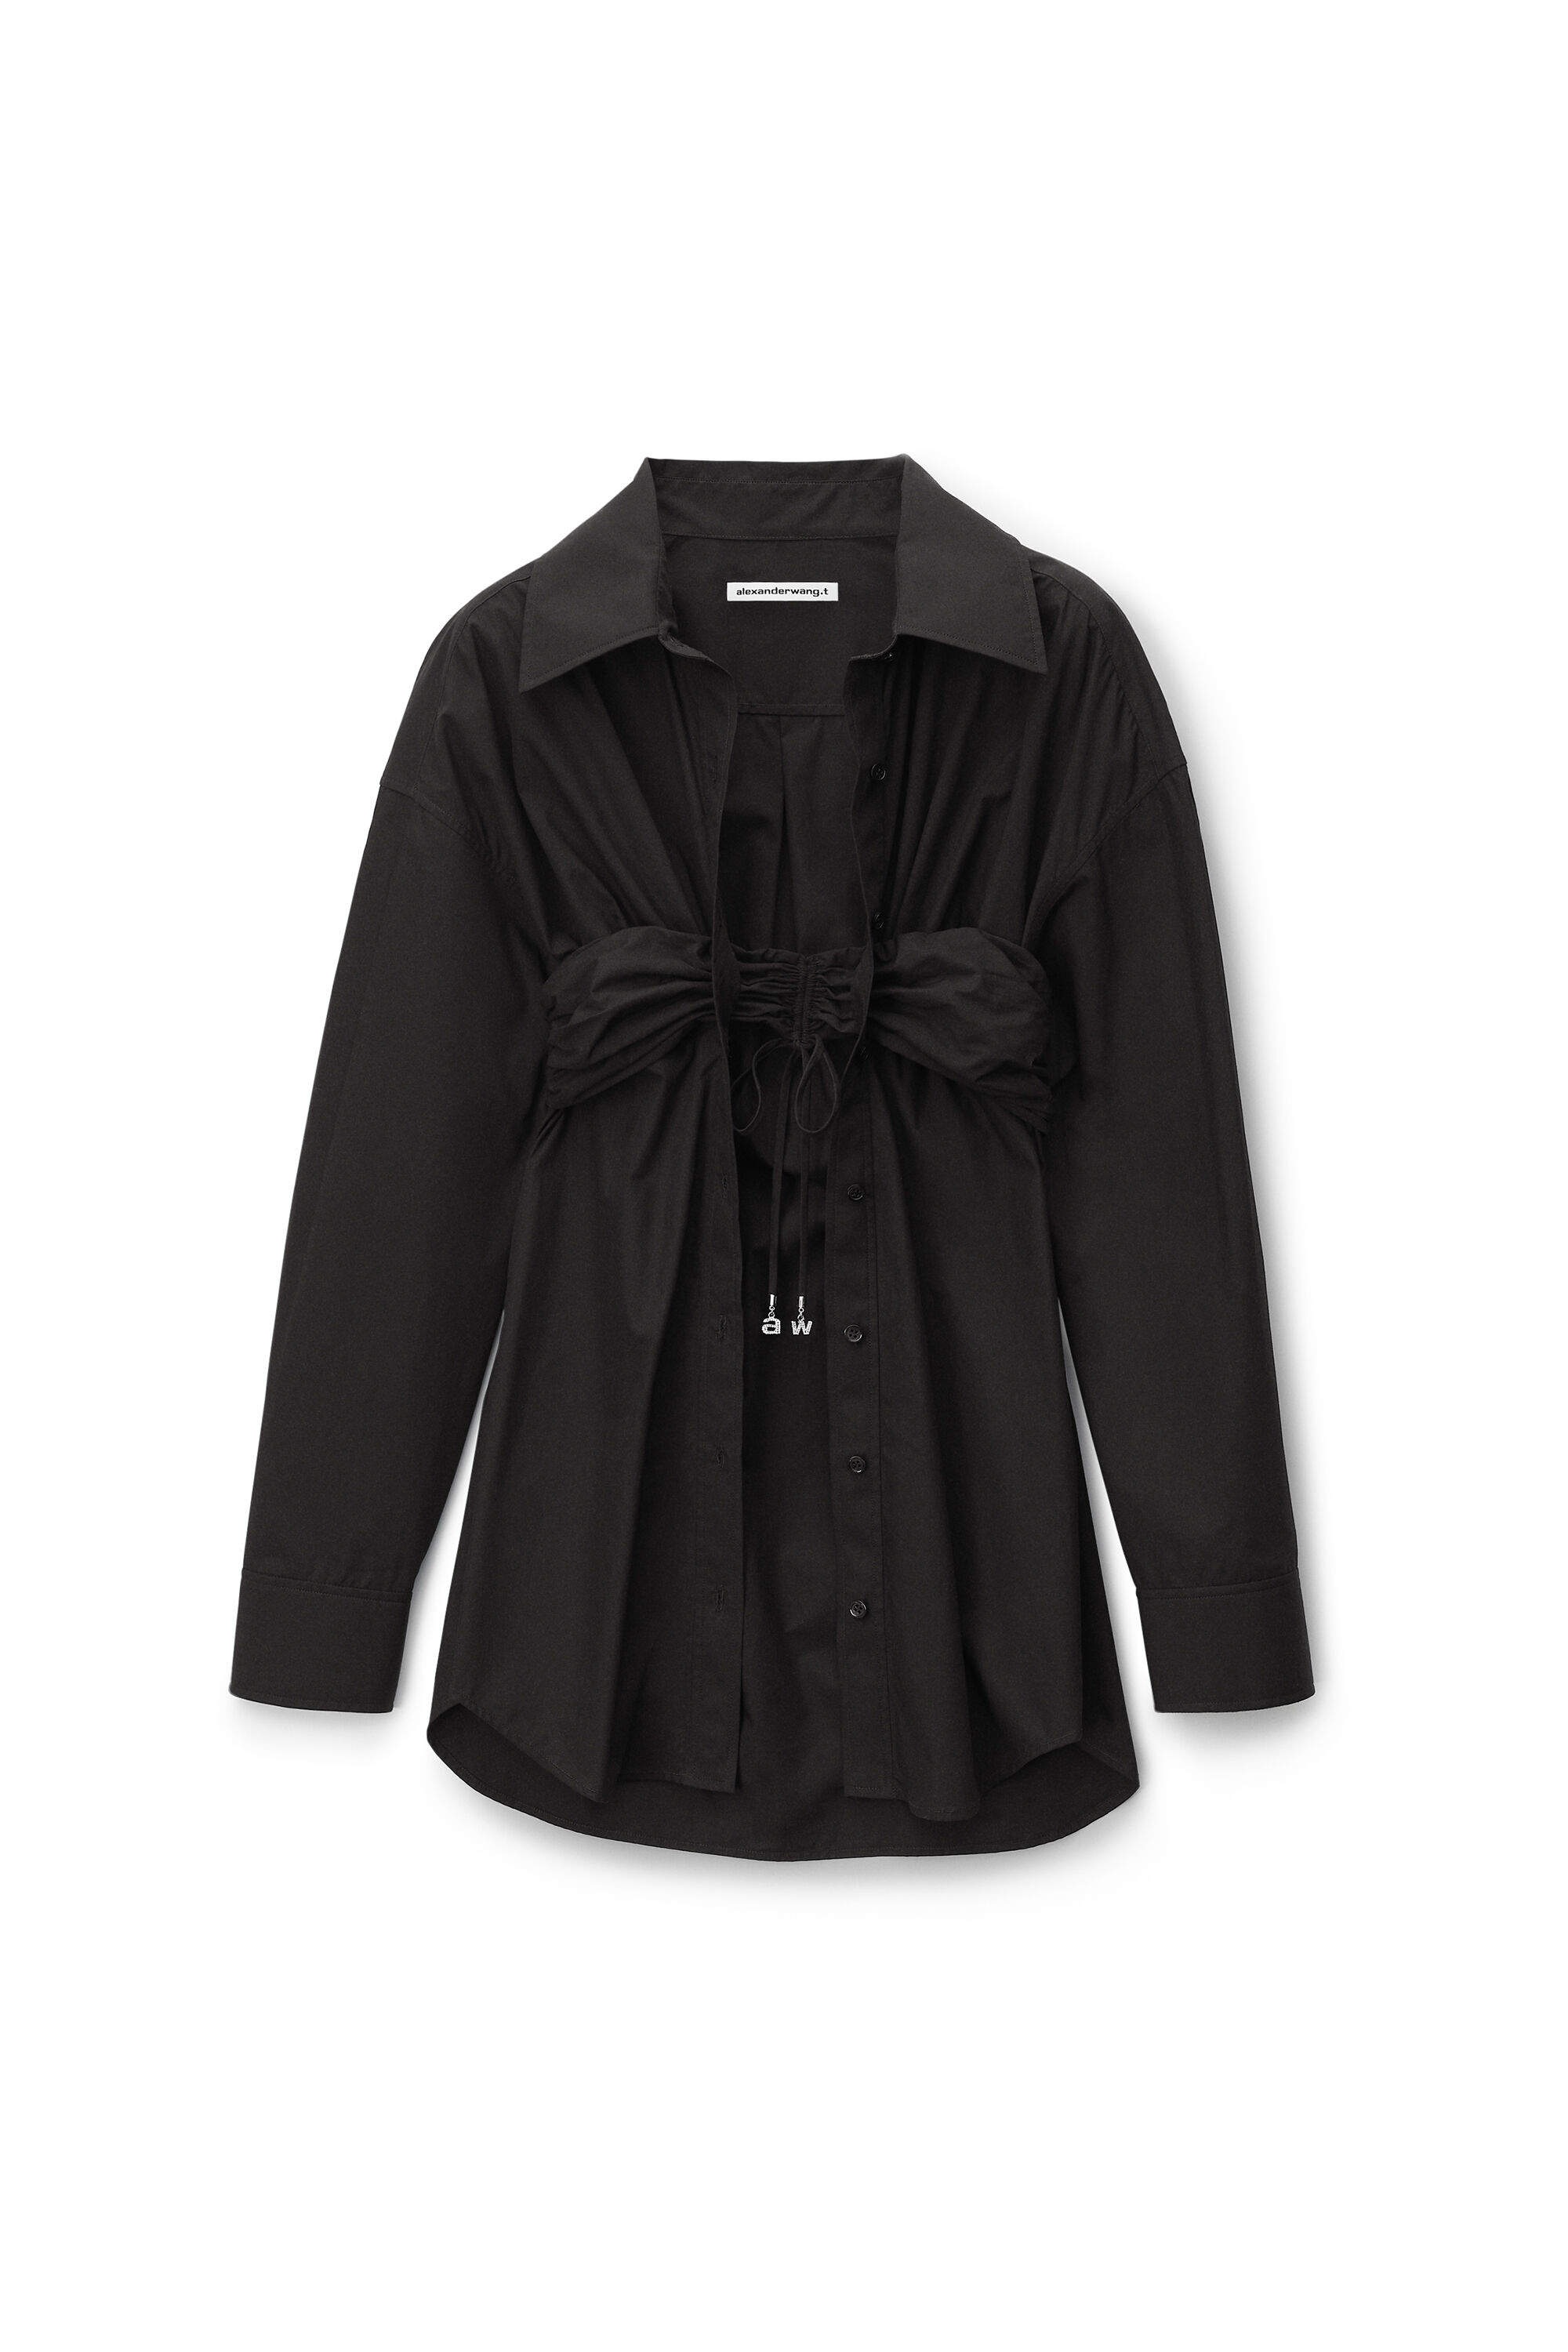 alexanderwang RUCHED BANDEAU SHIRT IN COMPACT 